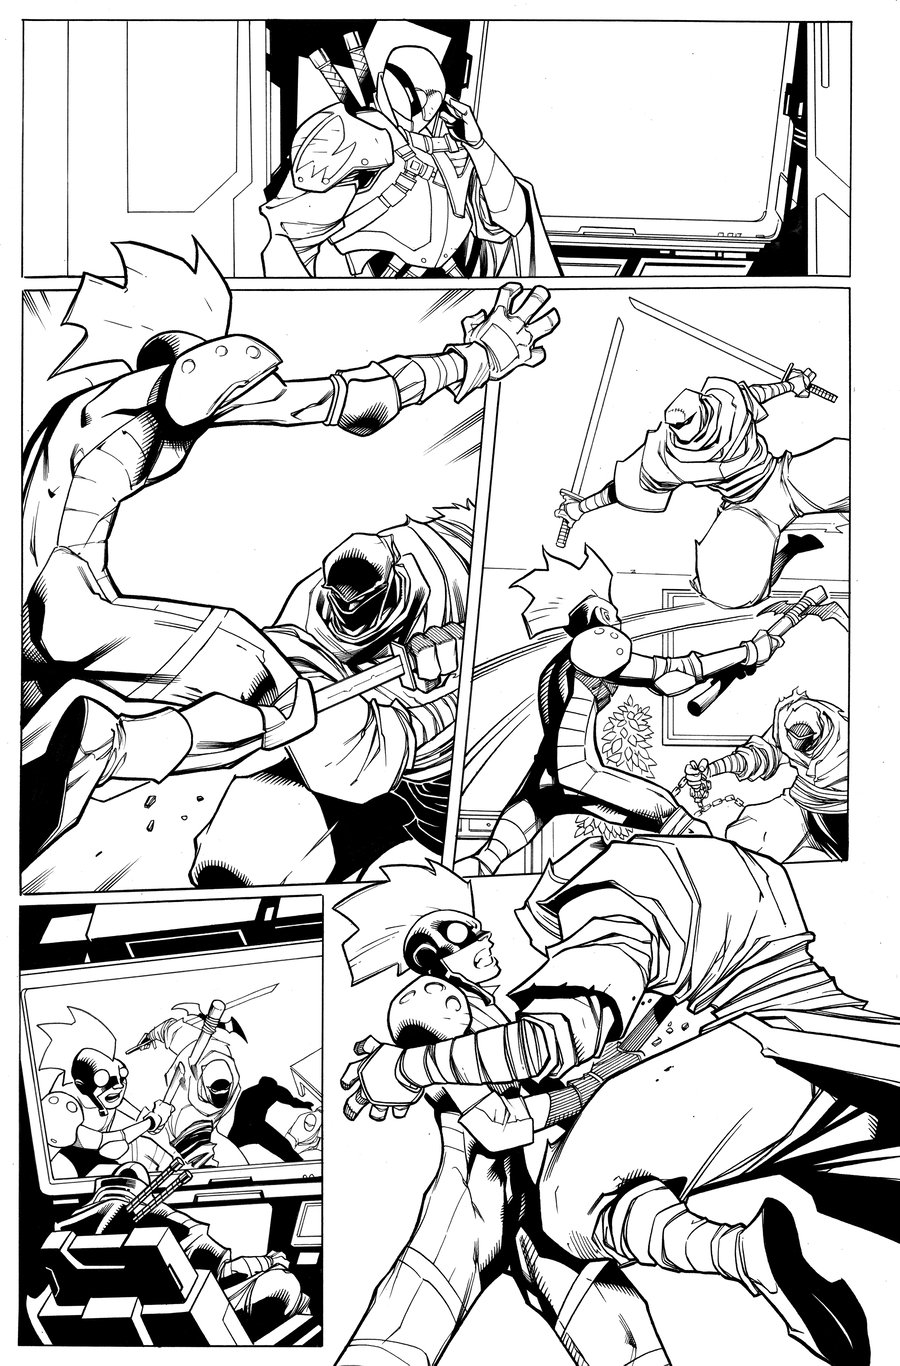 Image of Shadow War Zone #1: Ghostmaker and Clown Hunter PG 04